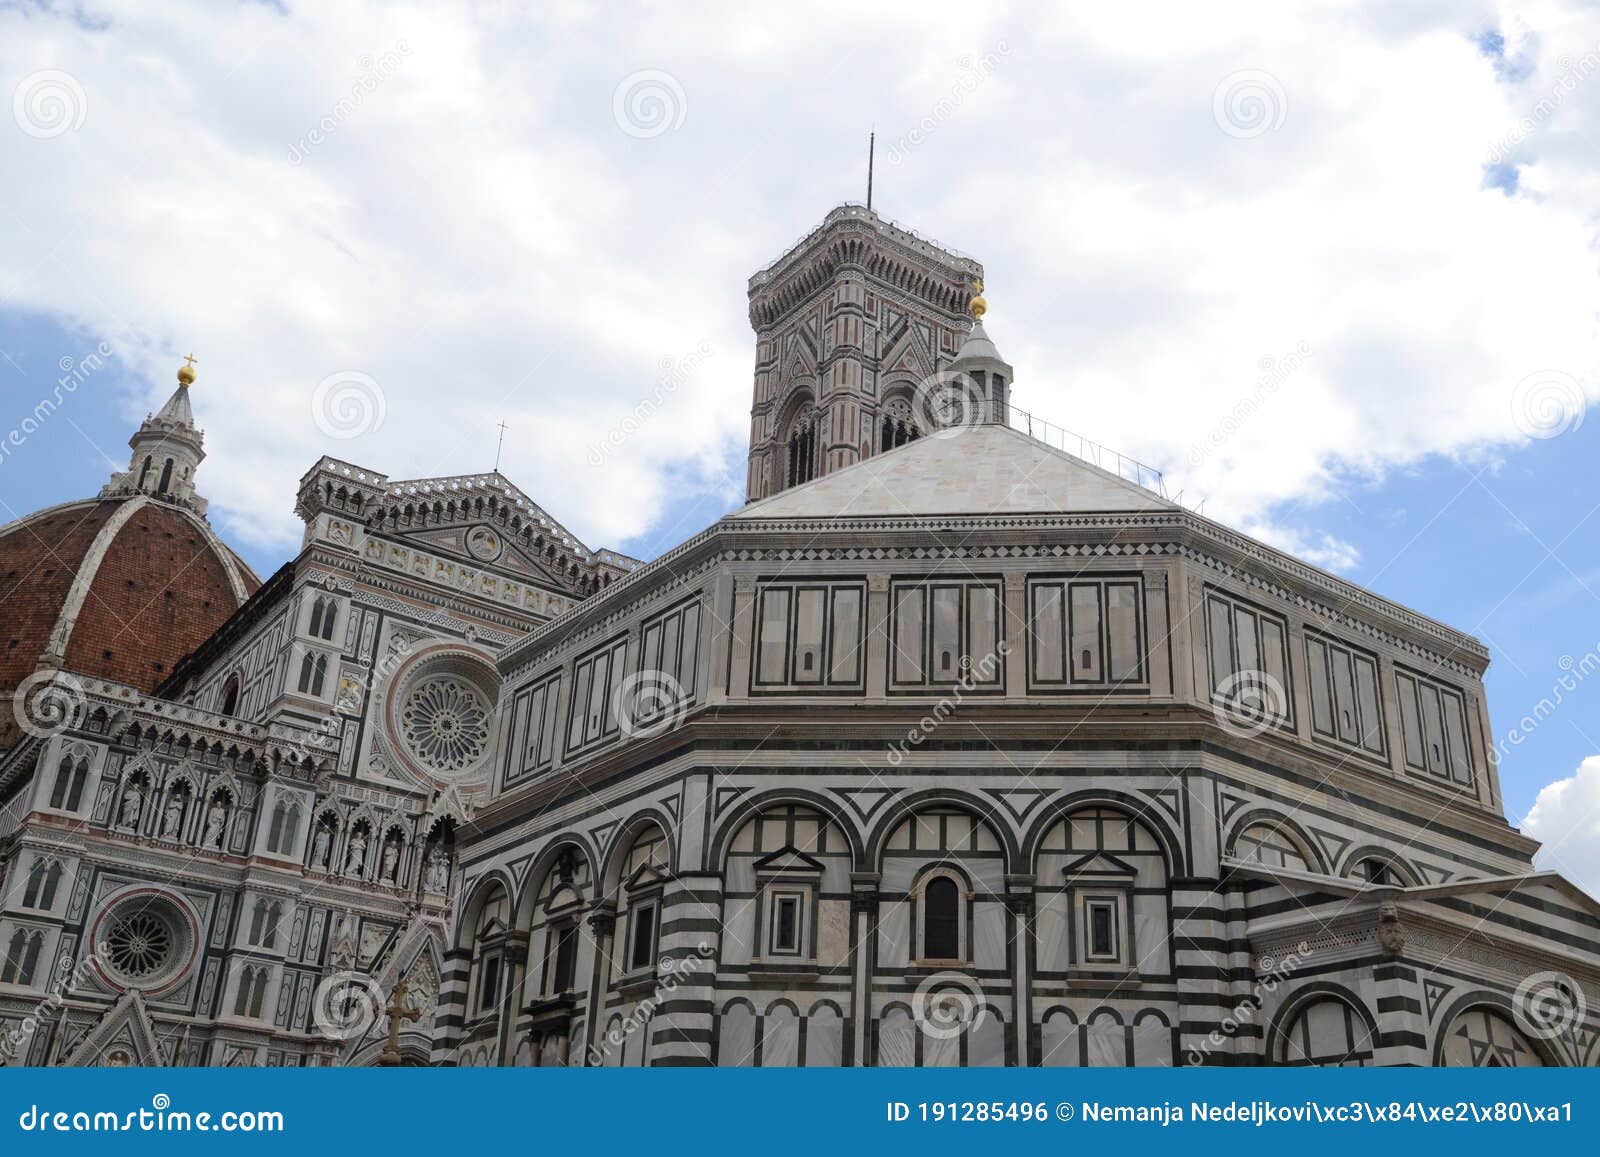 part of the famous cathedral in florence. il duomo